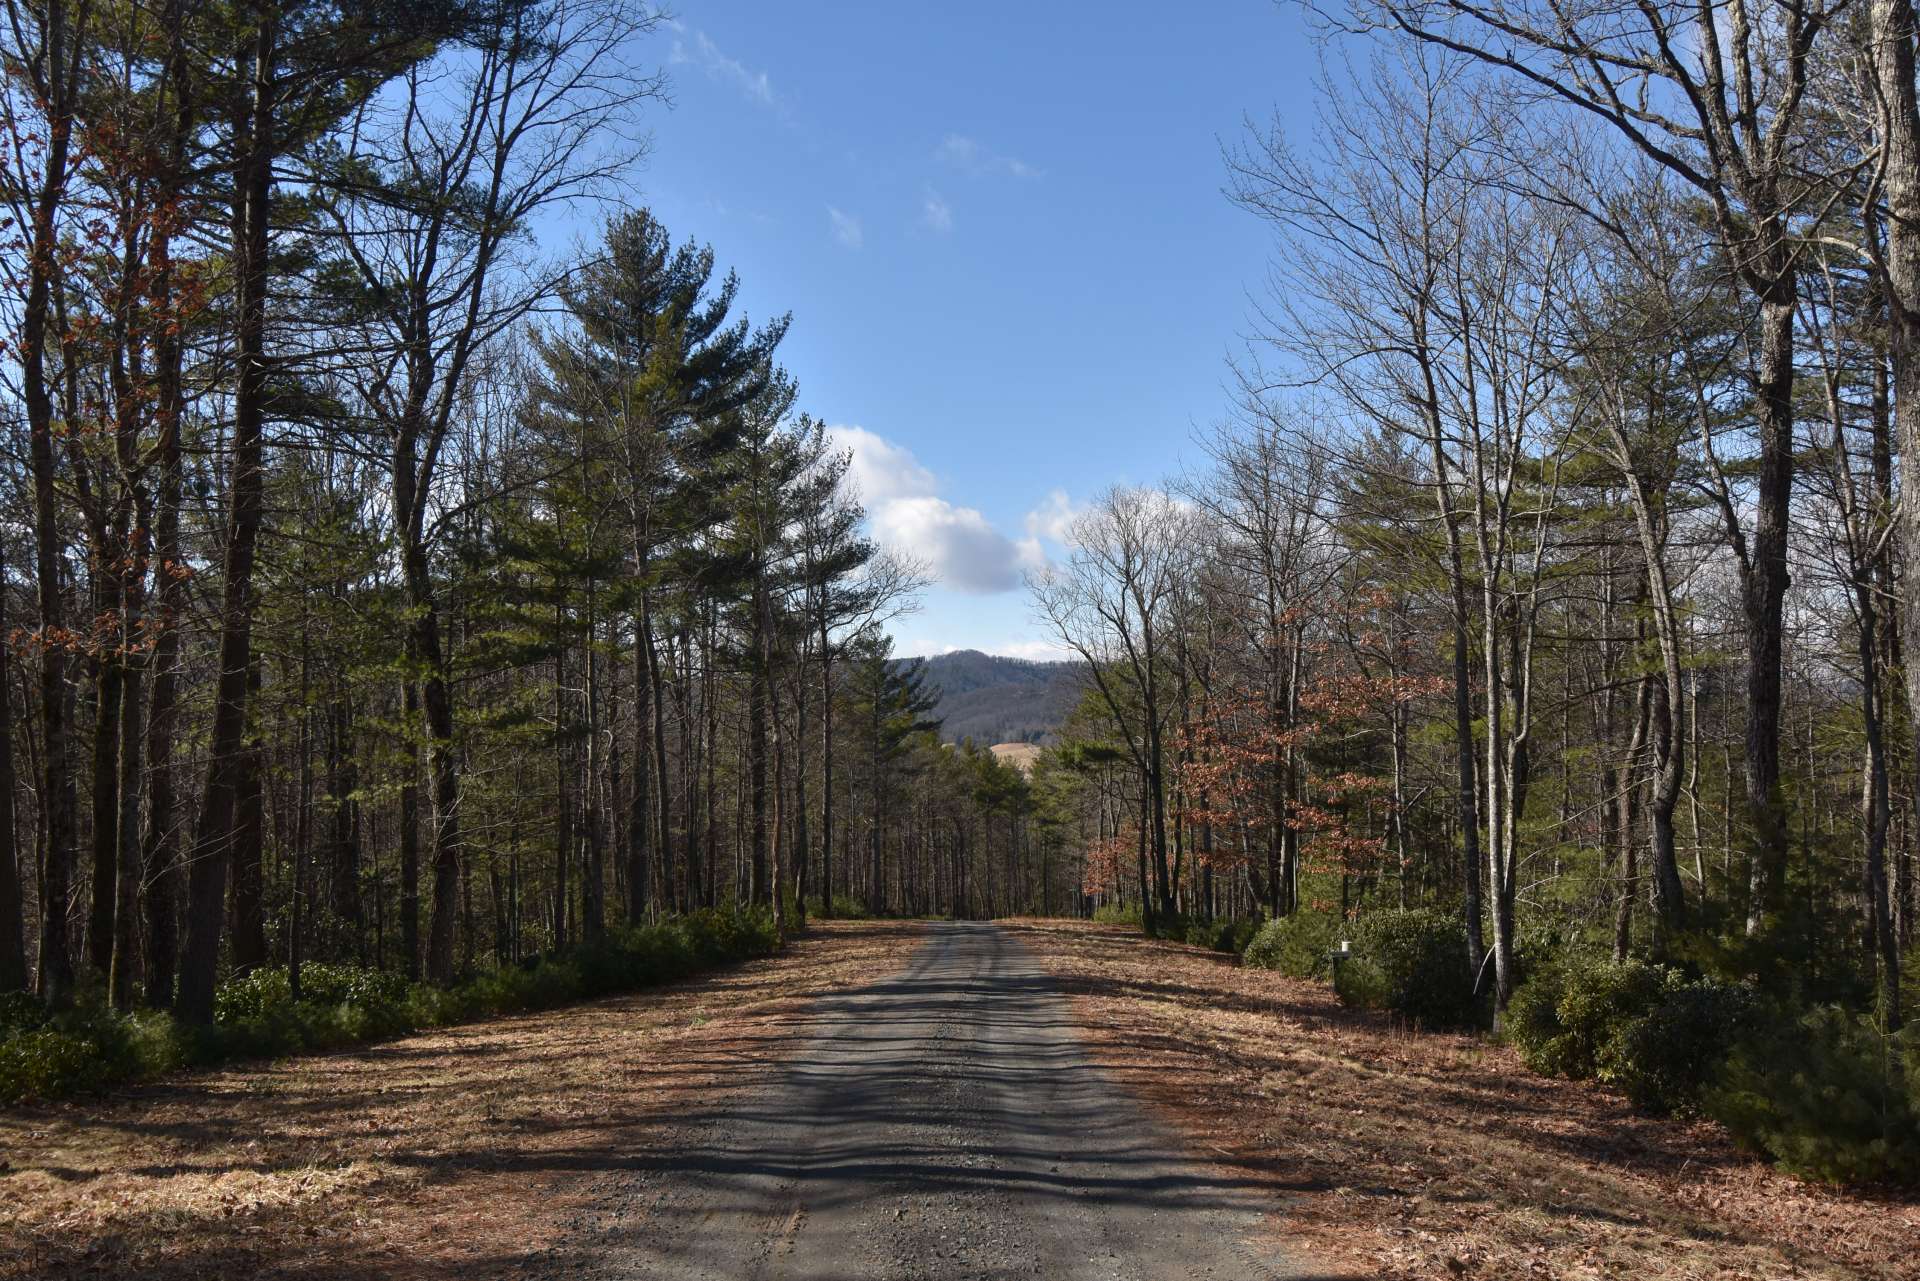 The Glens @ Calloway Gap  is a small subdivision with wide roads, underground electrical service to the lots, and lots that lay well and are blanketed with hardwoods, Mountain Laurel, and Rhododendron.